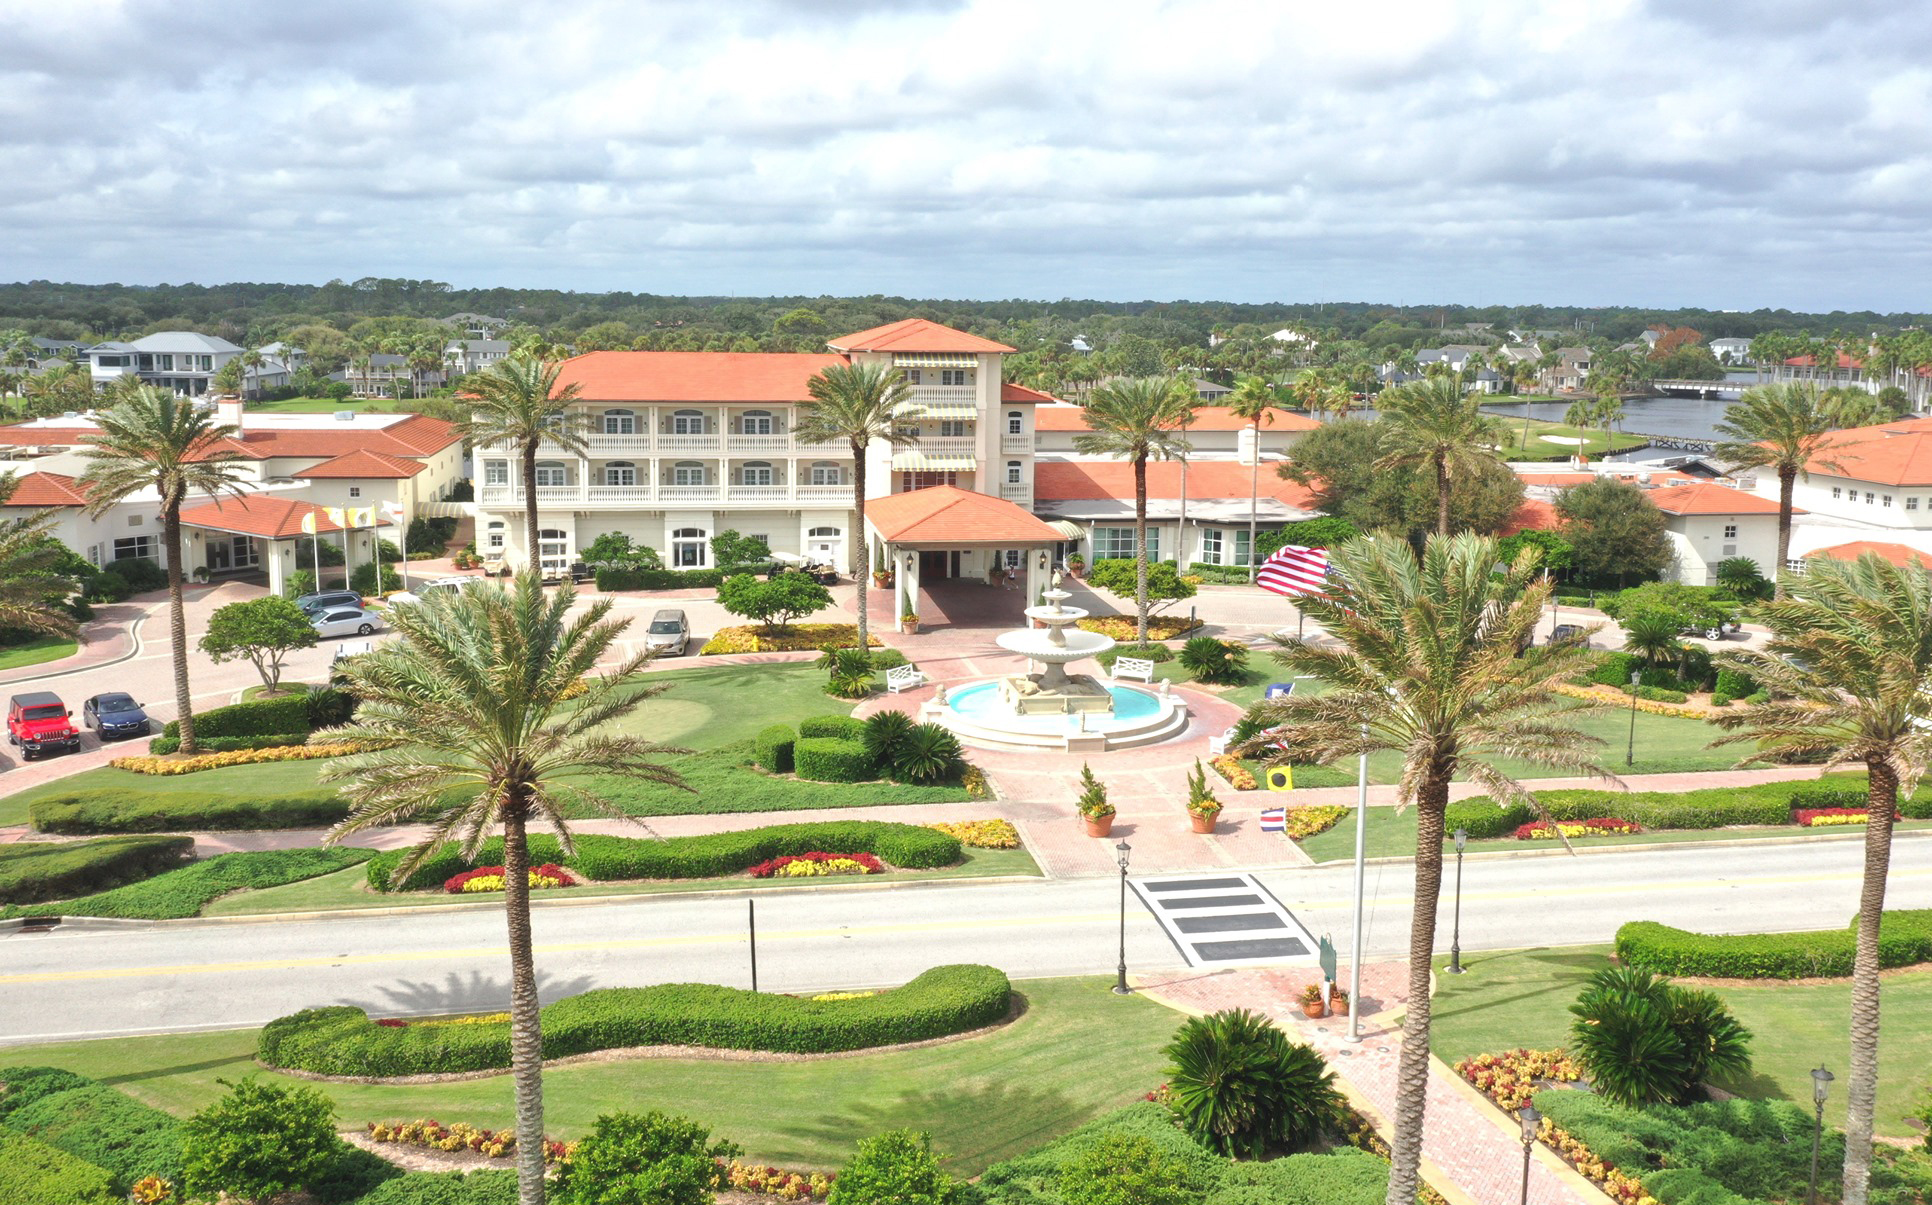 An aerial view of the Ponte Vedra Inn & Club from the resort's Facebook page.